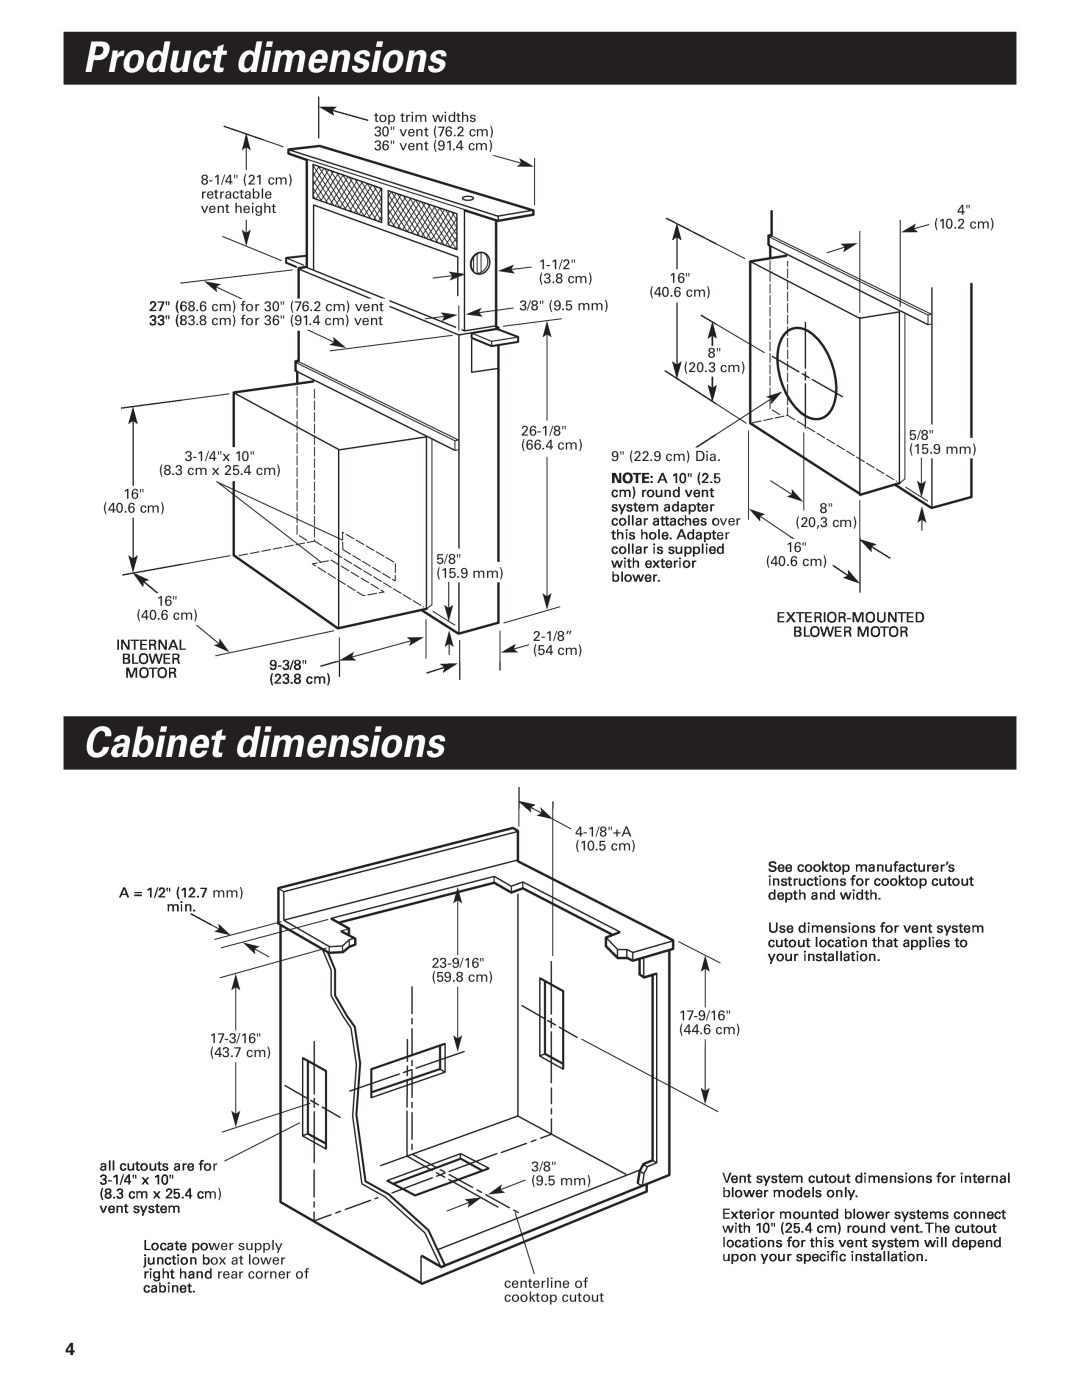 KitchenAid KPEU722M installation instructions Product dimensions, Cabinet dimensions 